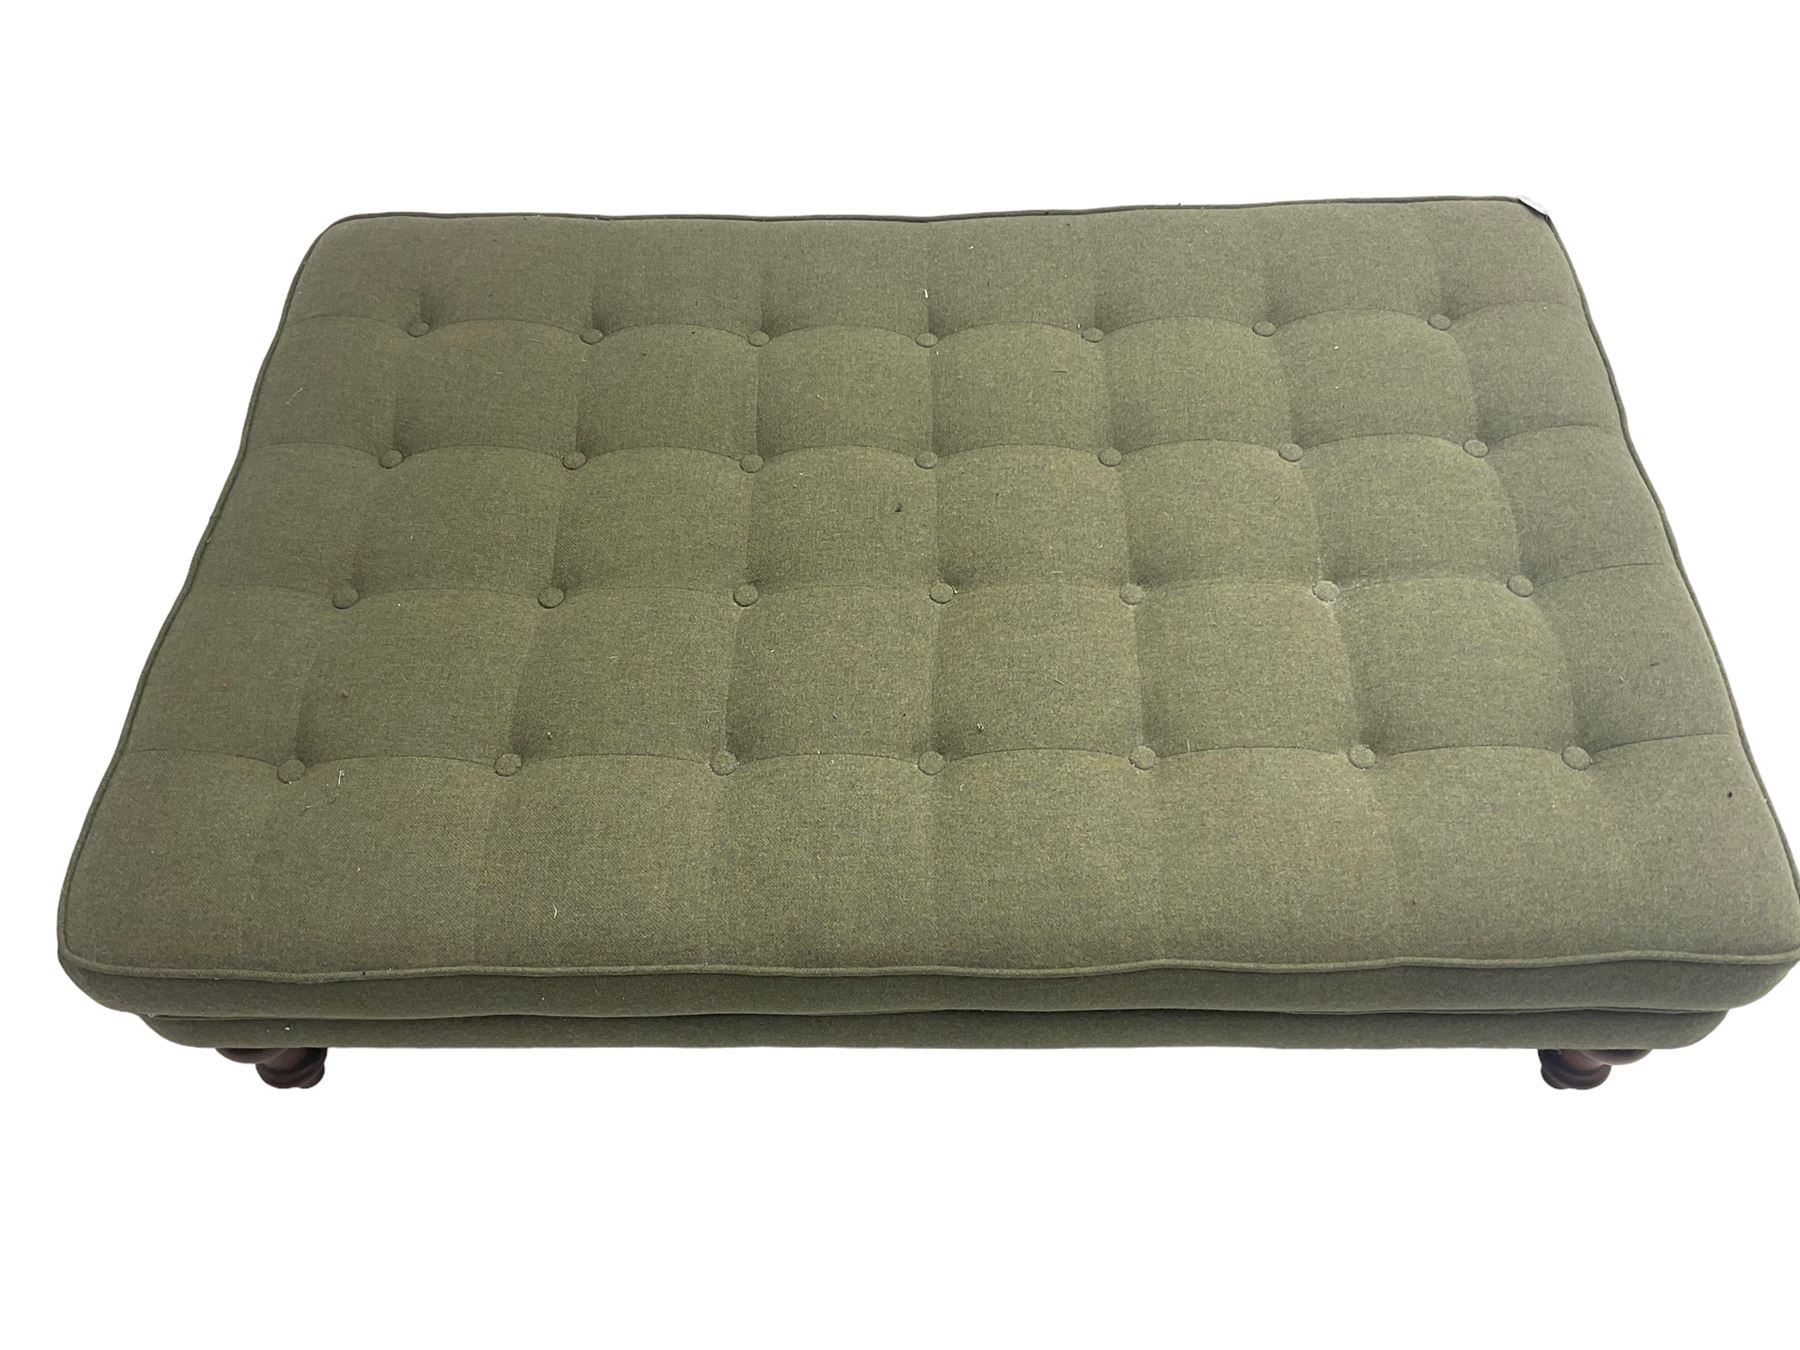 Peter Silk of Helmsley - large rectangular footstool upholstered in buttoned green tweed fabric - Image 6 of 7